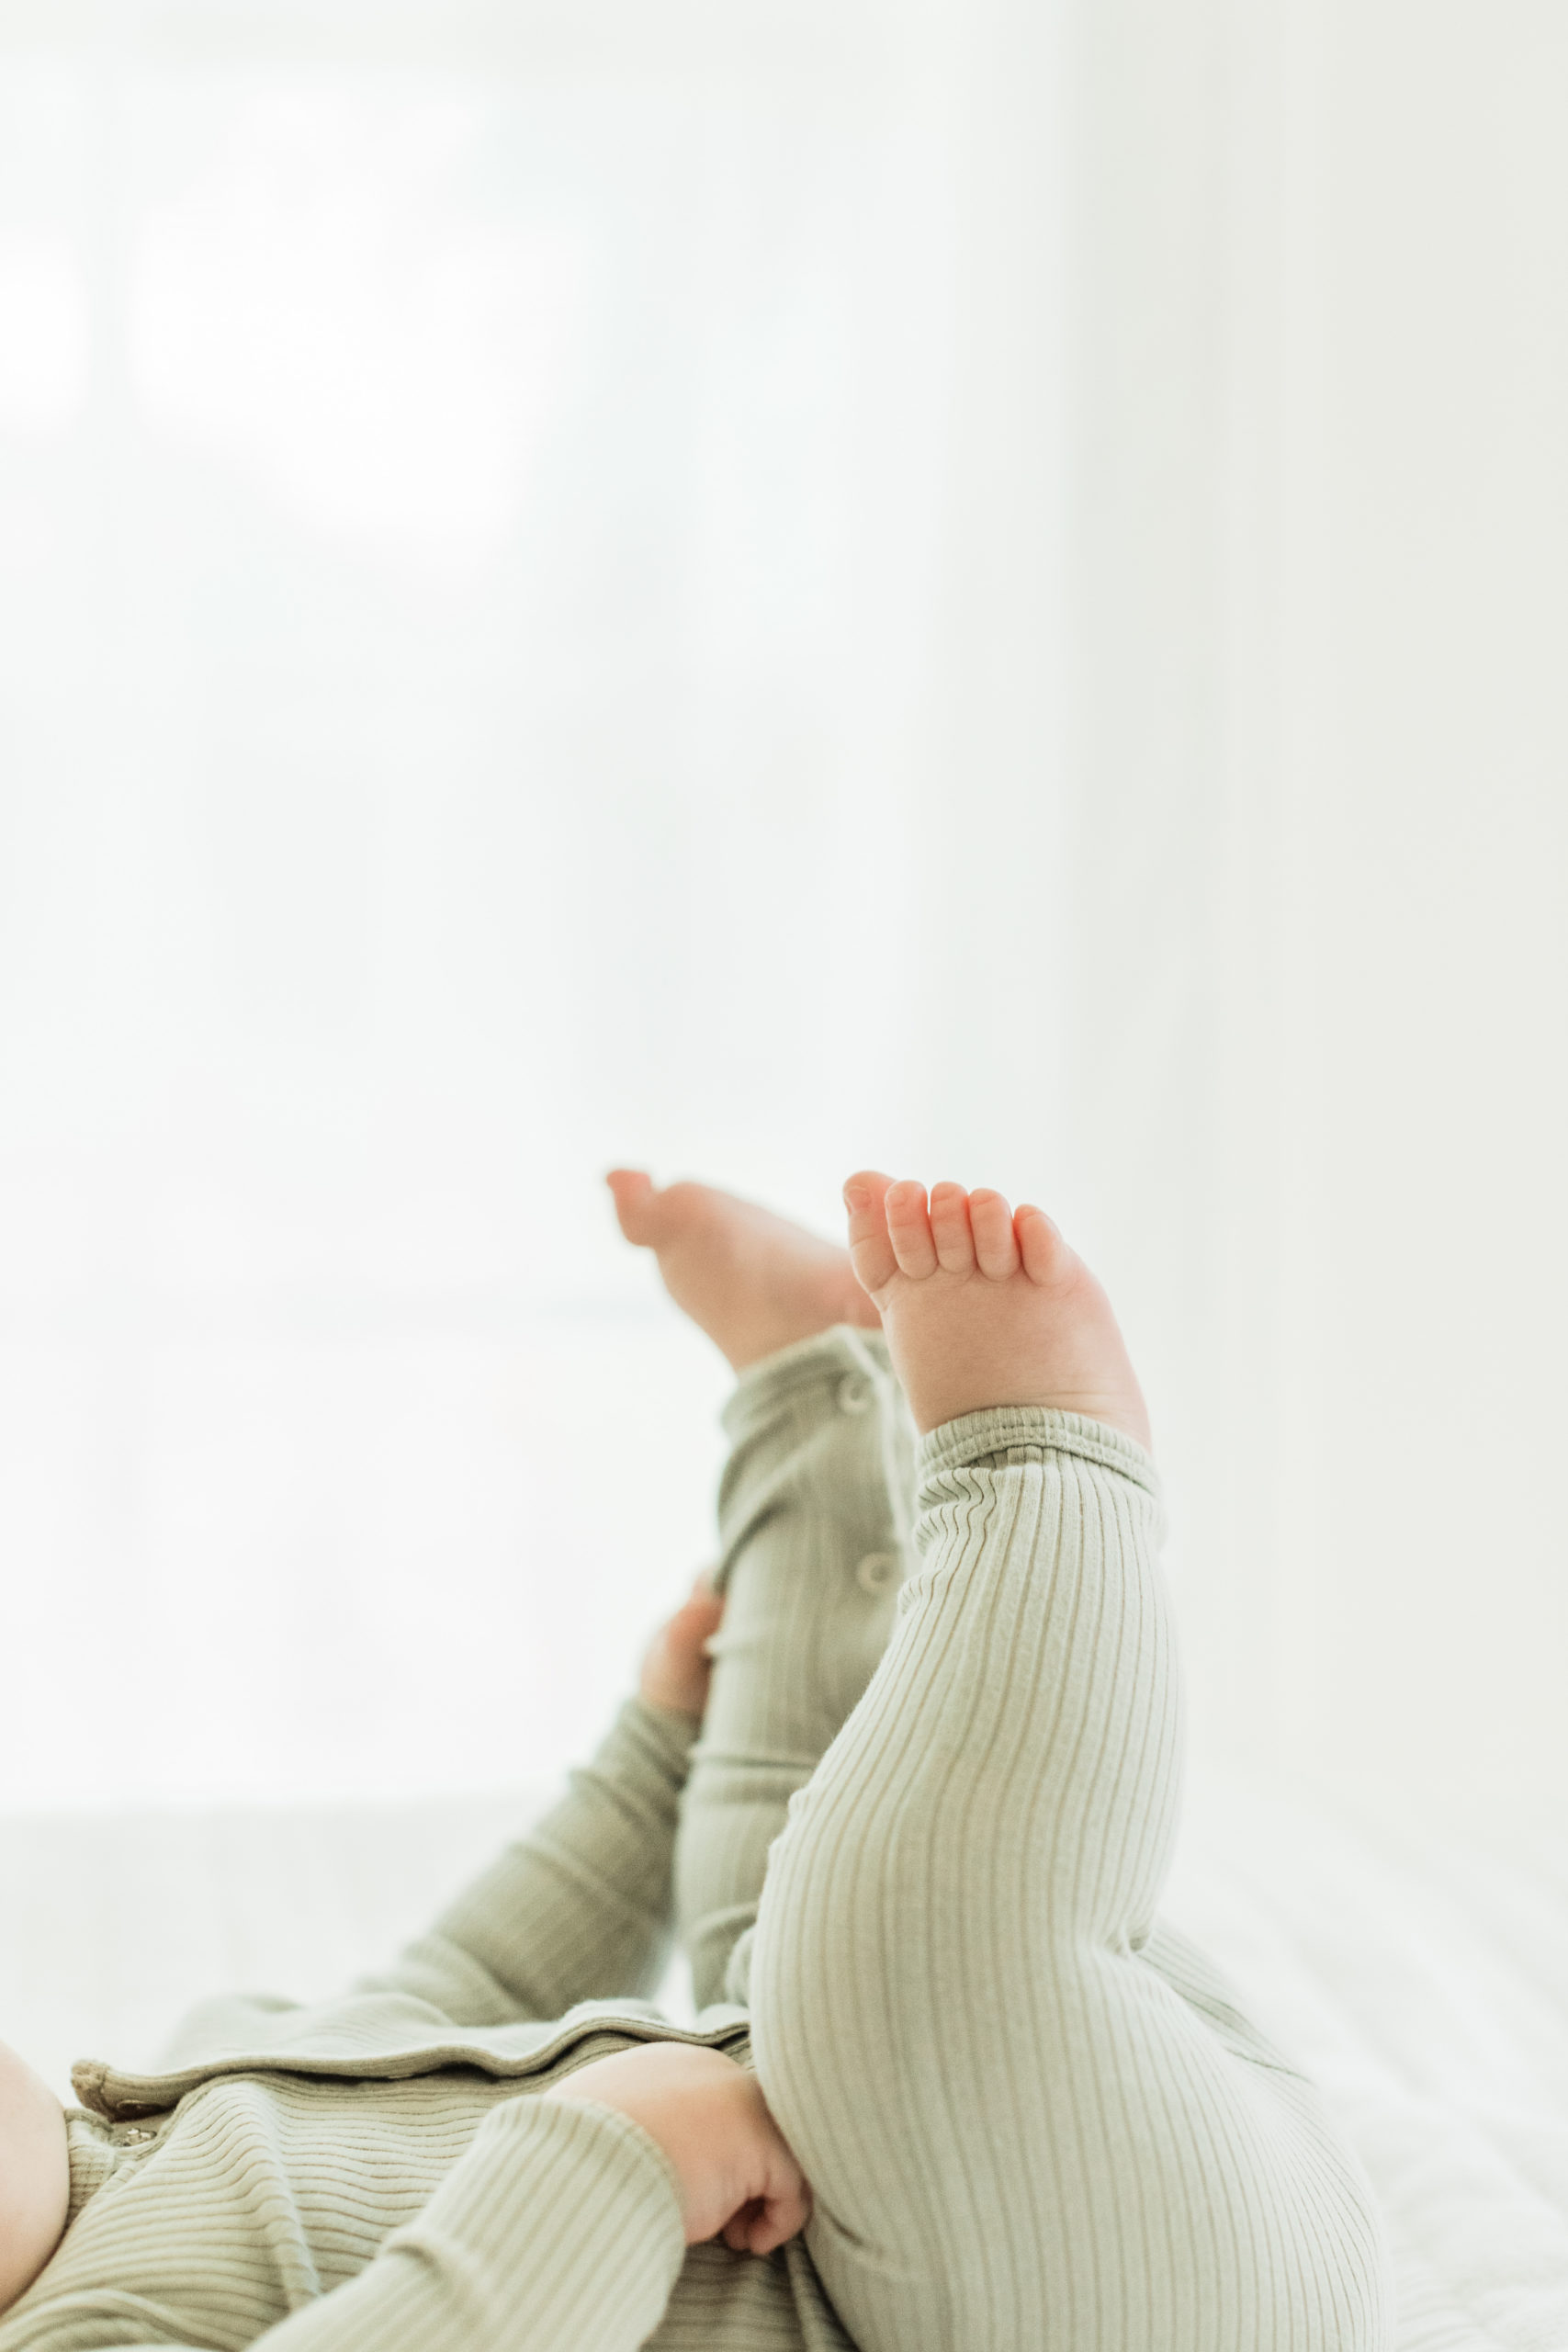 six month old baby boy putting his feet up in the air and wearing light green onesie